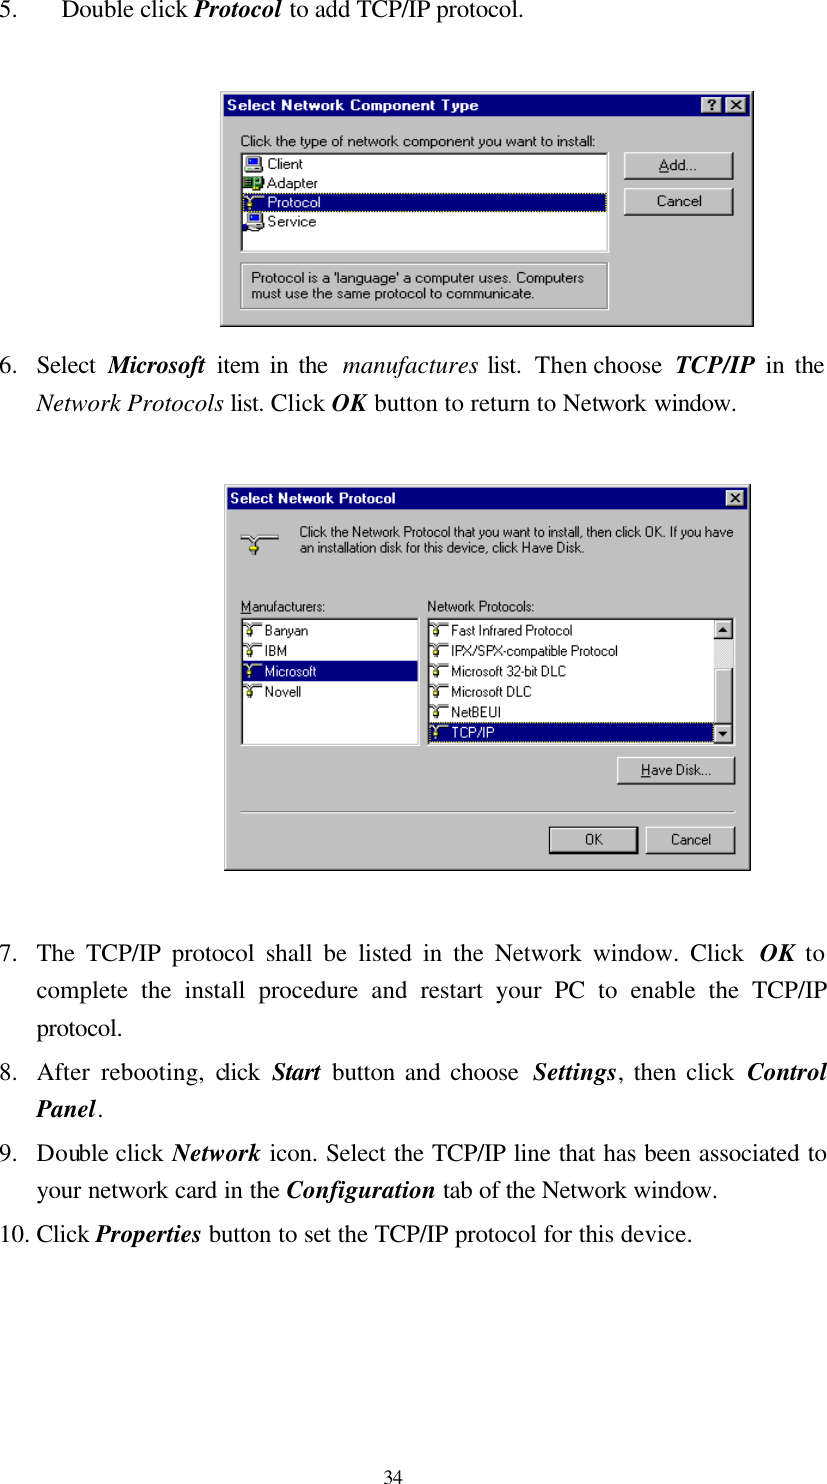  34 5. Double click Protocol to add TCP/IP protocol.   6. Select  Microsoft item in the  manufactures list.  Then choose  TCP/IP in the Network Protocols list. Click OK button to return to Network window.    7. The TCP/IP protocol shall be listed in the Network window. Click  OK to complete the install procedure and restart your PC to enable the TCP/IP protocol. 8. After rebooting, click  Start button and choose  Settings, then click Control Panel. 9. Double click Network icon. Select the TCP/IP line that has been associated to your network card in the Configuration tab of the Network window. 10. Click Properties button to set the TCP/IP protocol for this device.  